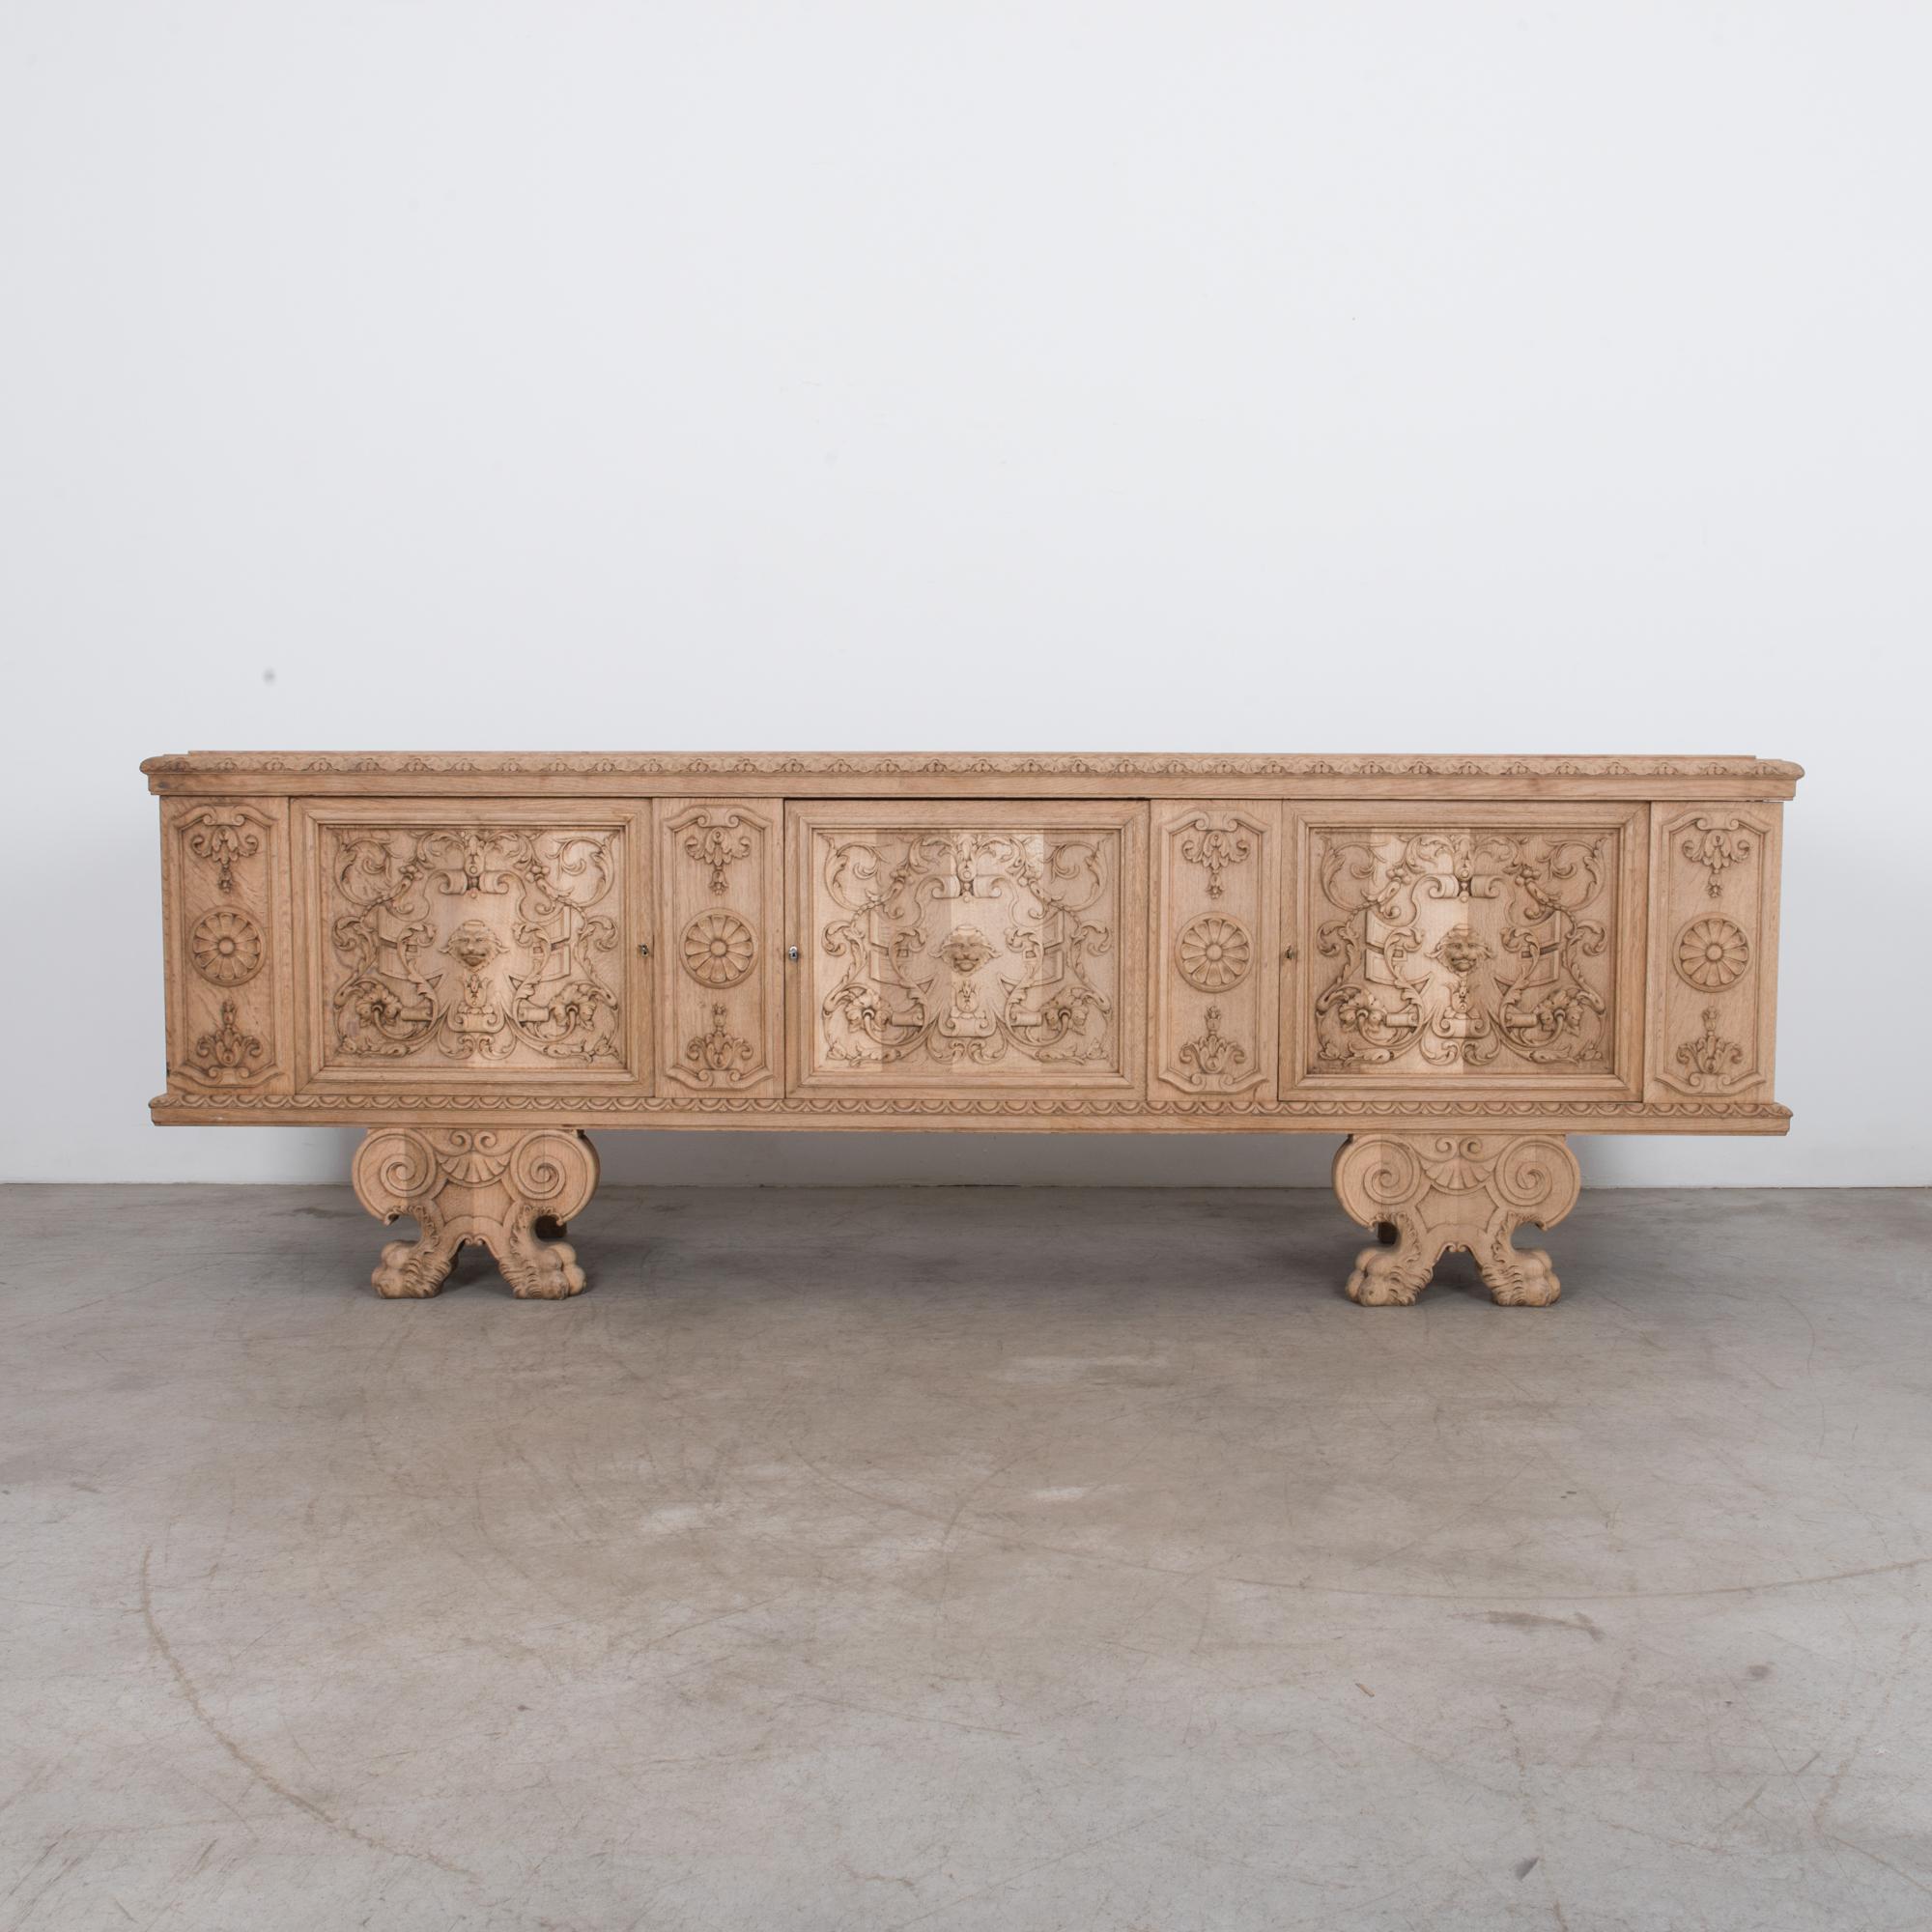 Ornate carved three-door console cabinet in oak. A clear wax finish highlights the natural wood grain. This piece great character with unique figurative carving and lion motif give. A bright and textured oak is updated for contemporary interiors,